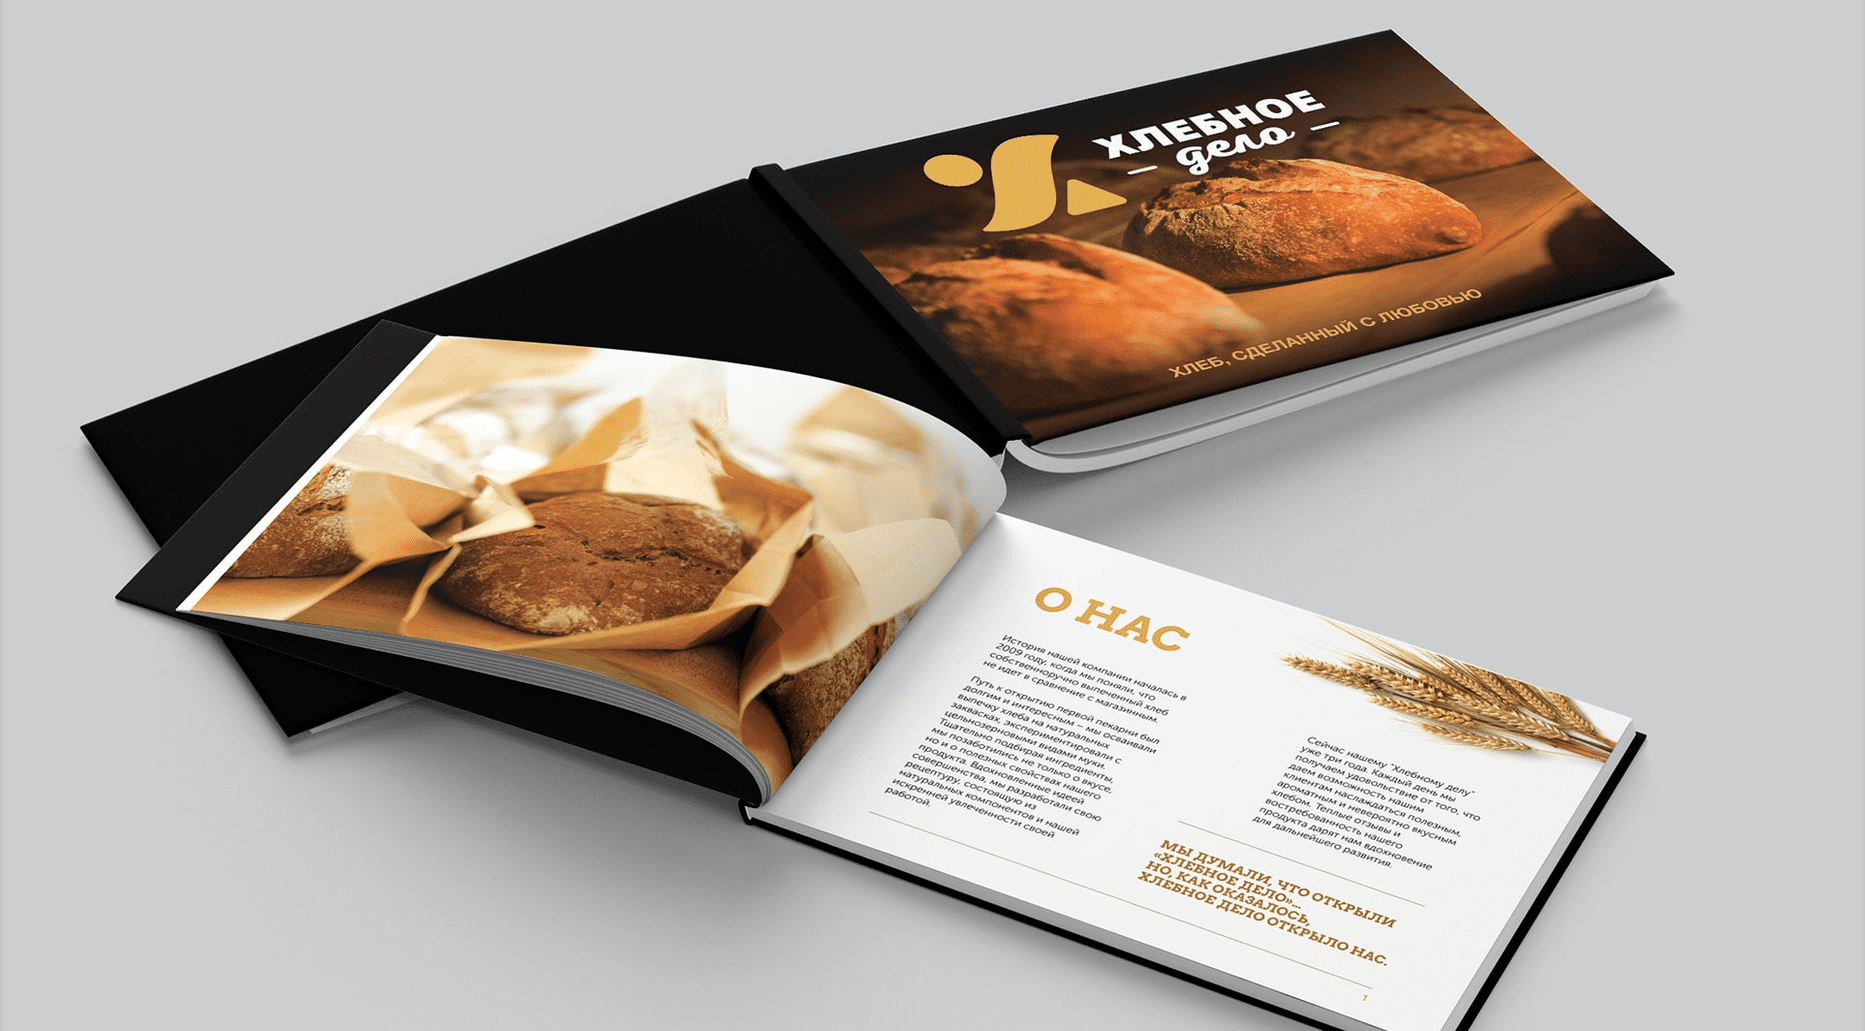 Case: logo design, branding and marketing kit for the bread business — Rubarb - Image - 13